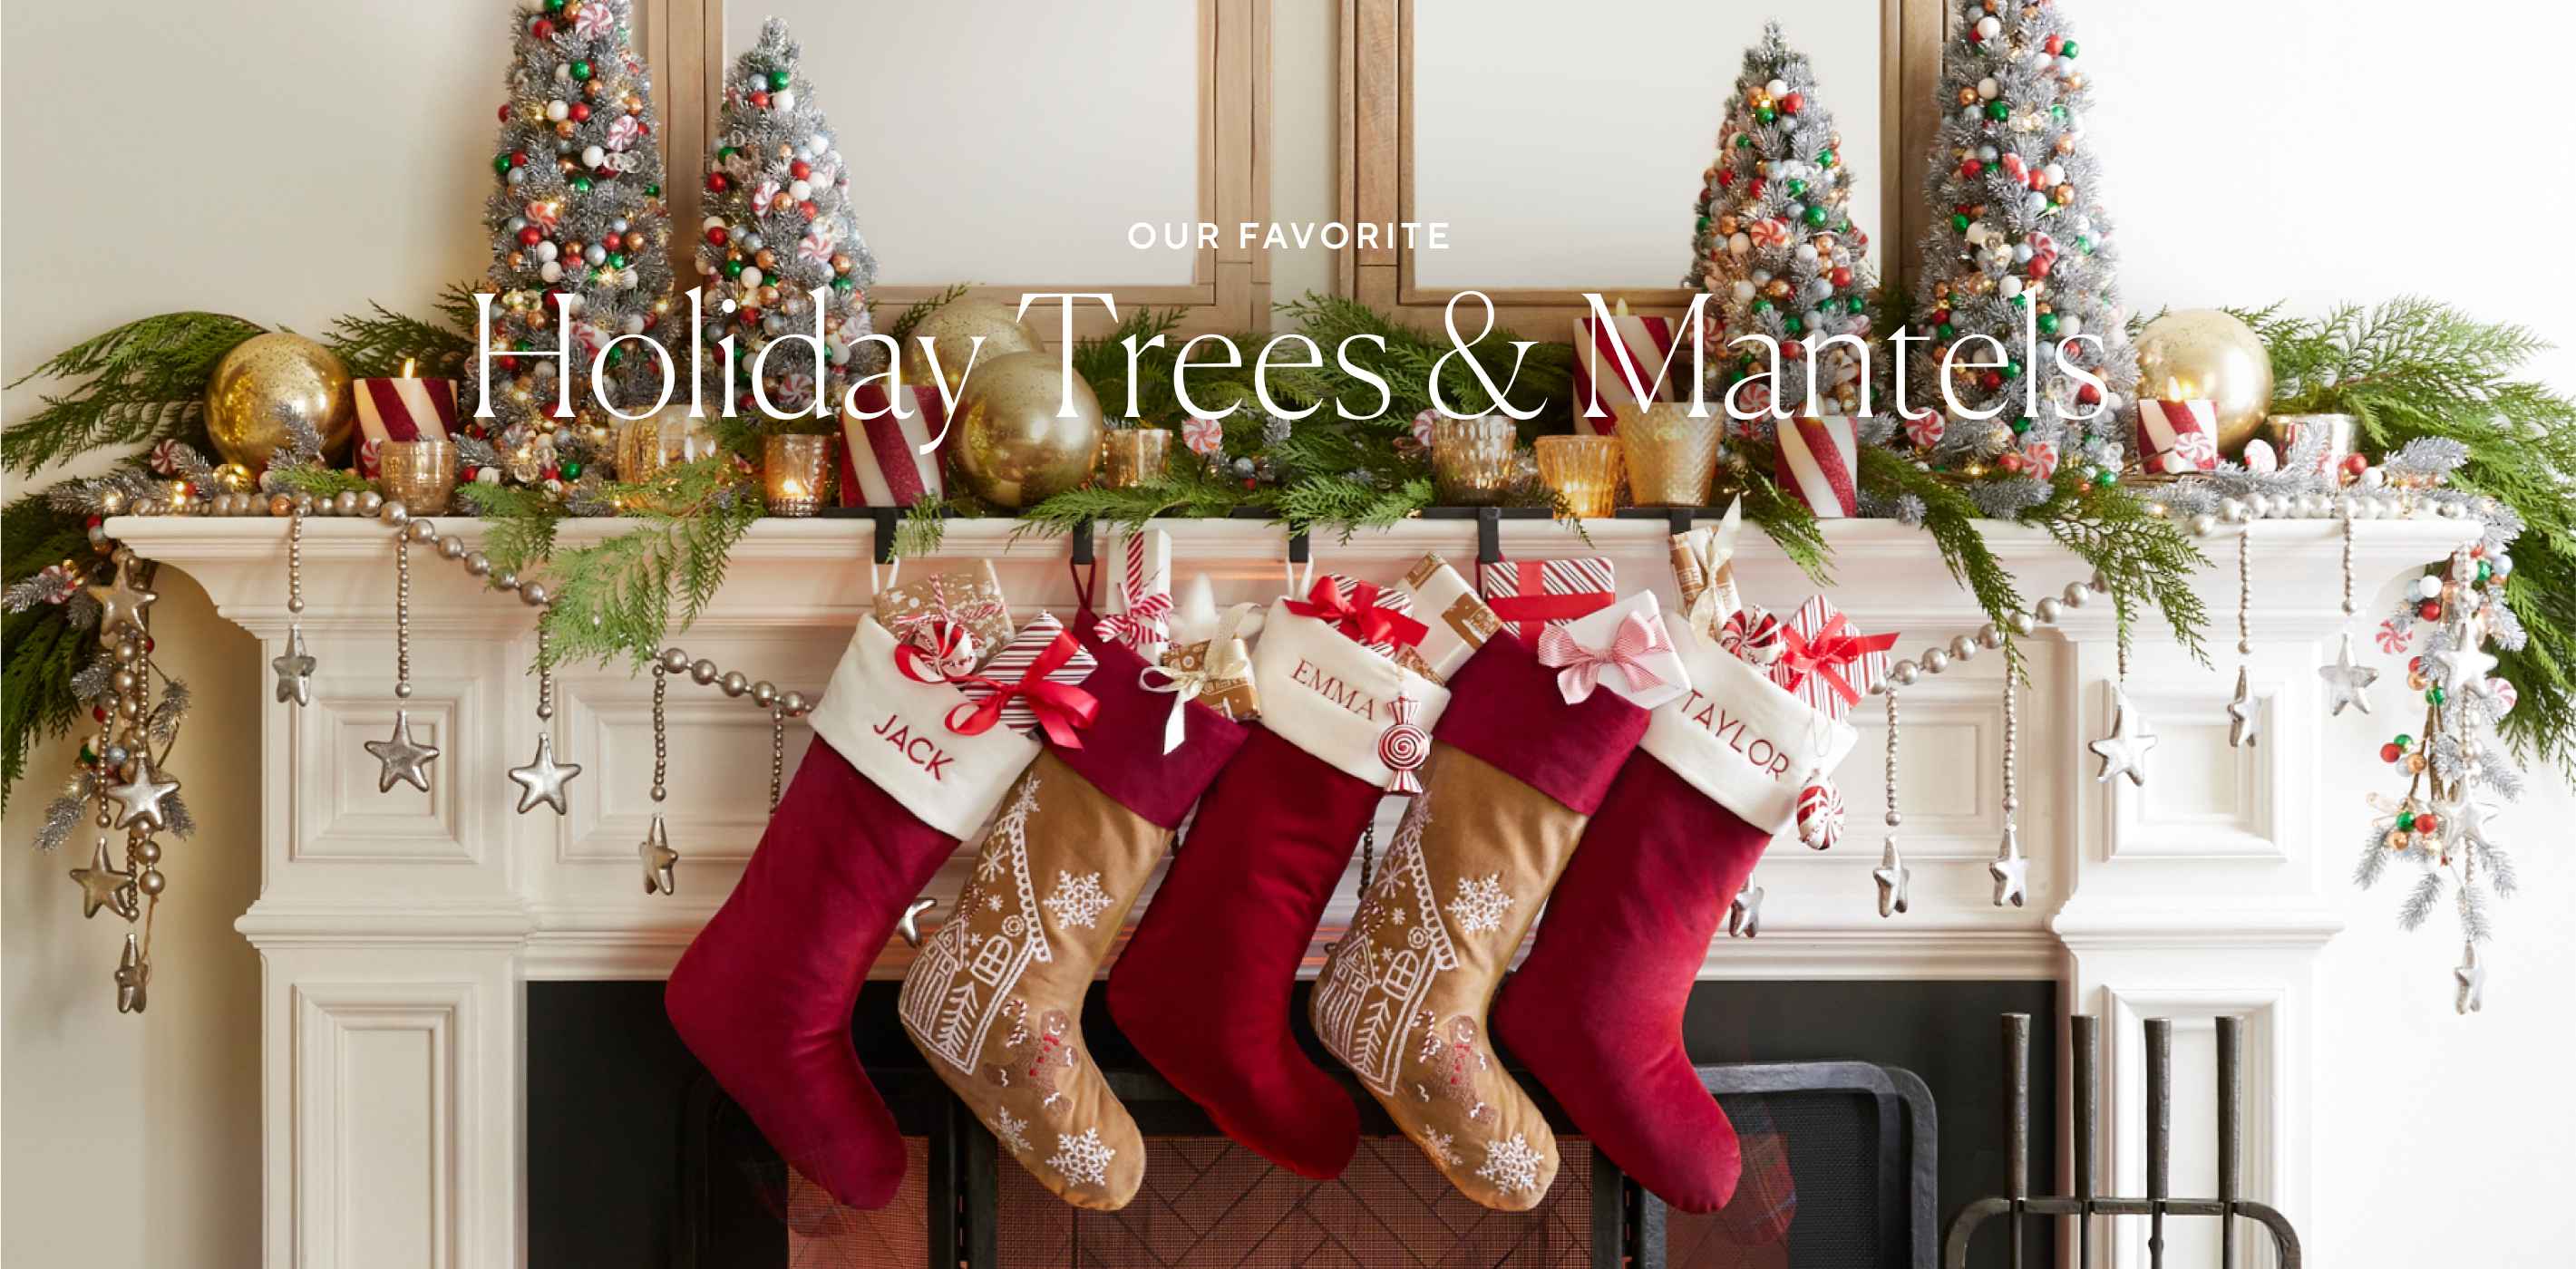 Our Favorite Holiday Trees & Mantels